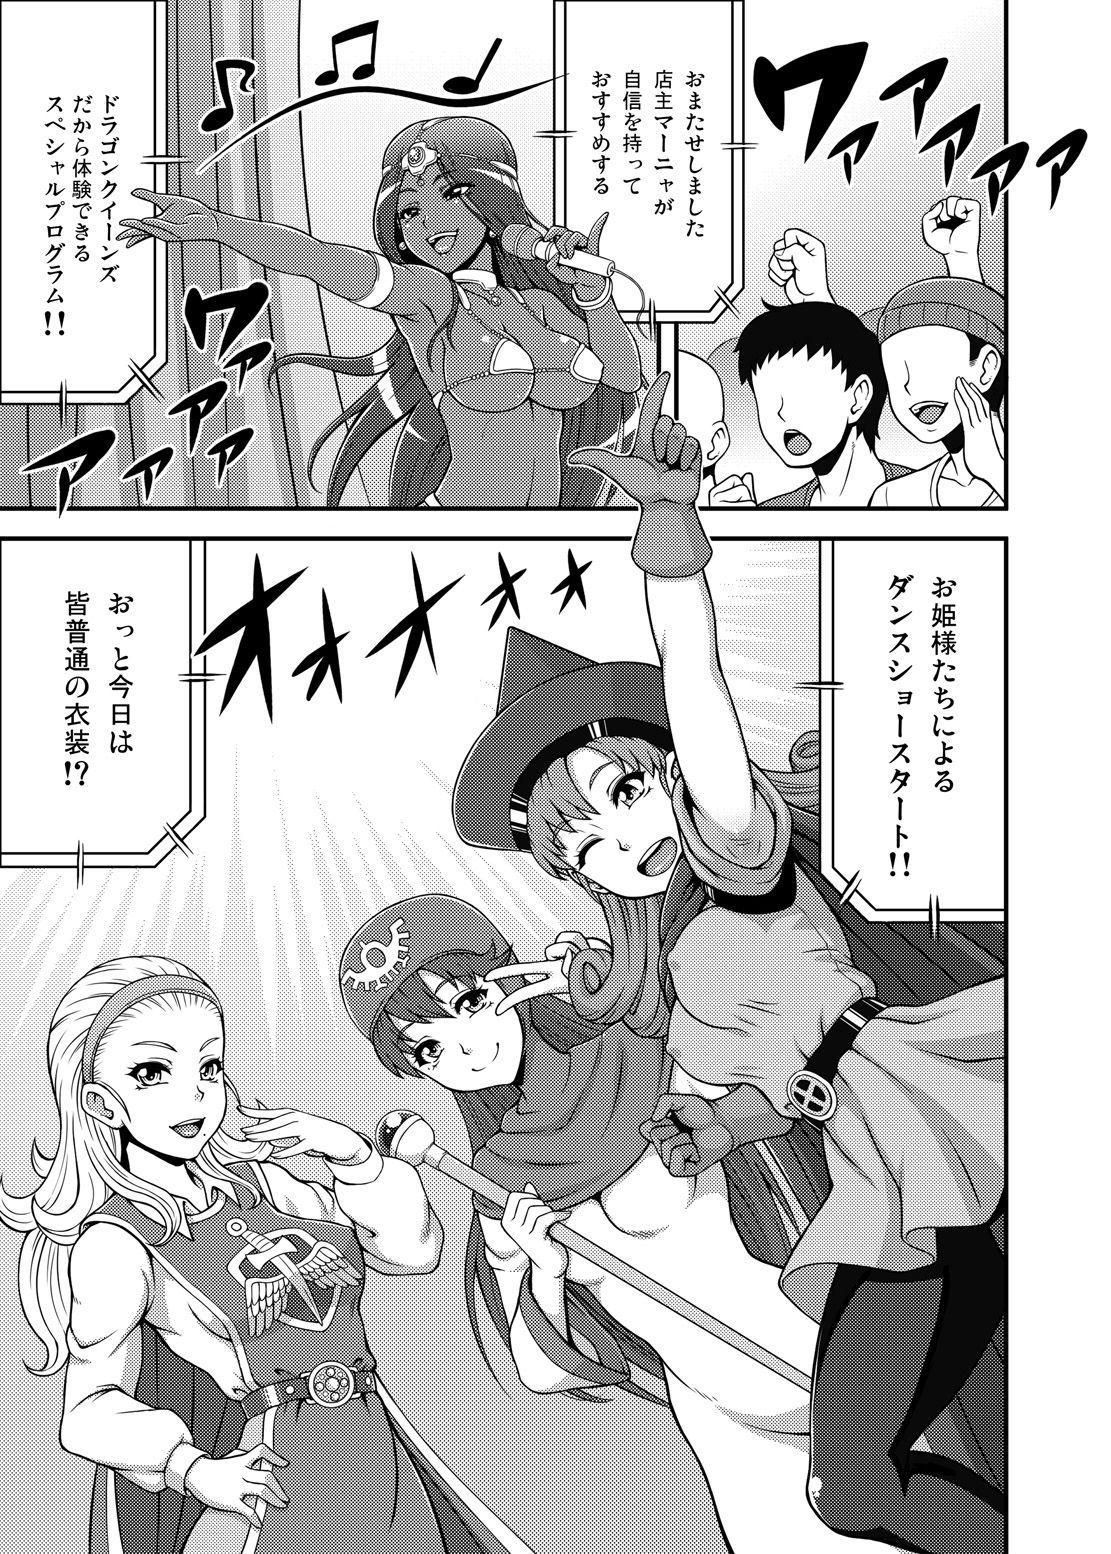 Sola Dragon Queen's 5 - King of fighters Dragon quest Curvy - Page 3